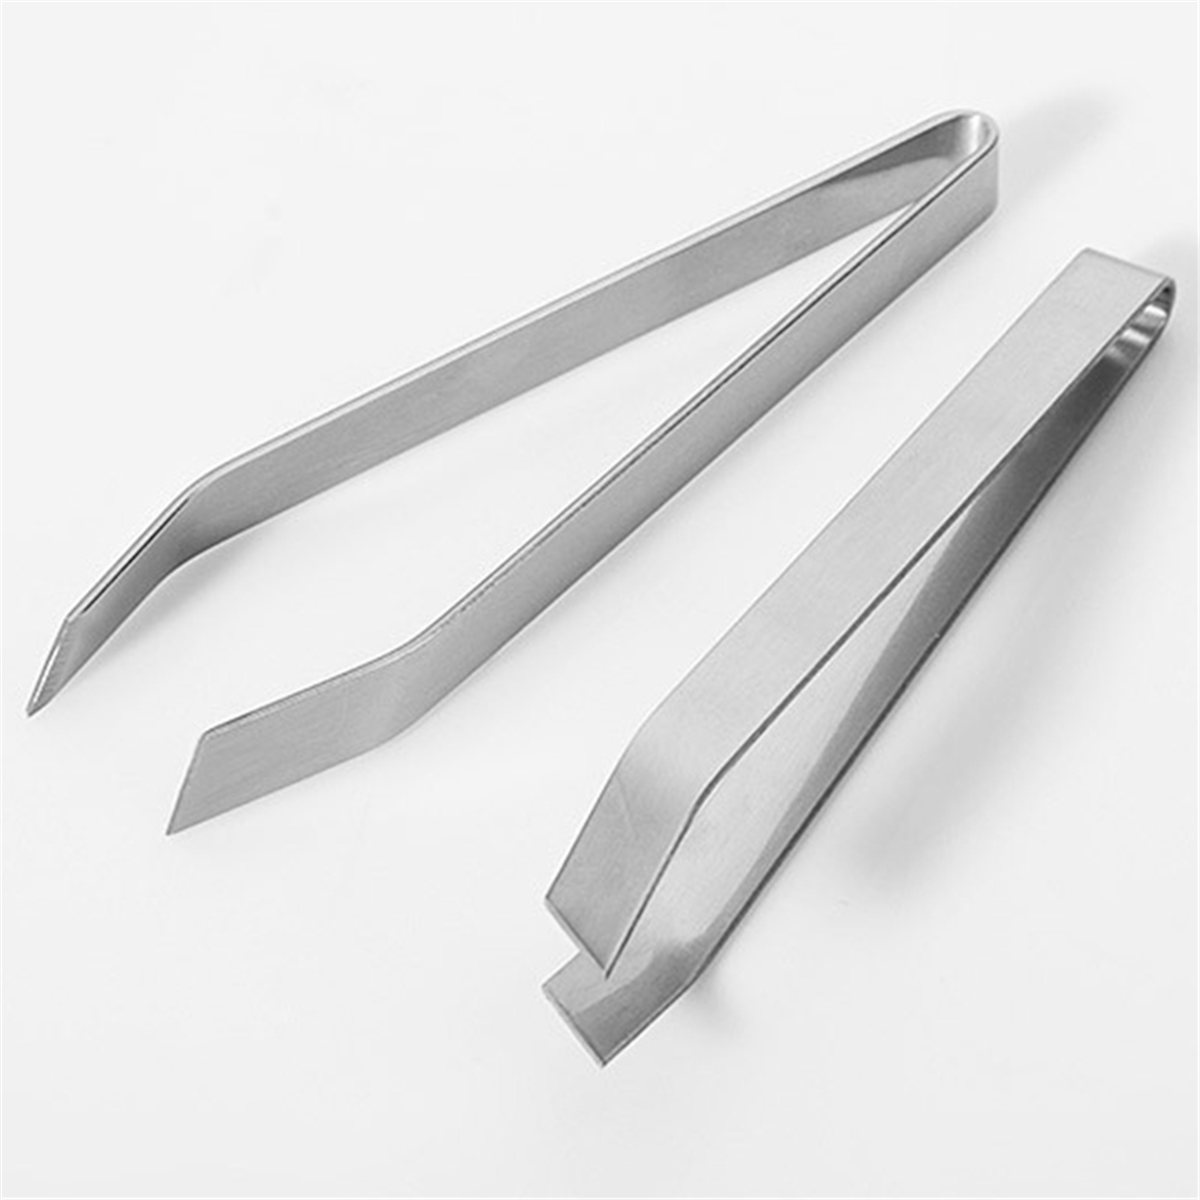 High Quality Stainless Steel Fish Bone Tweezers Remover Pincer Puller Tongs Pick-Up Seafood Tool Economic Crafts